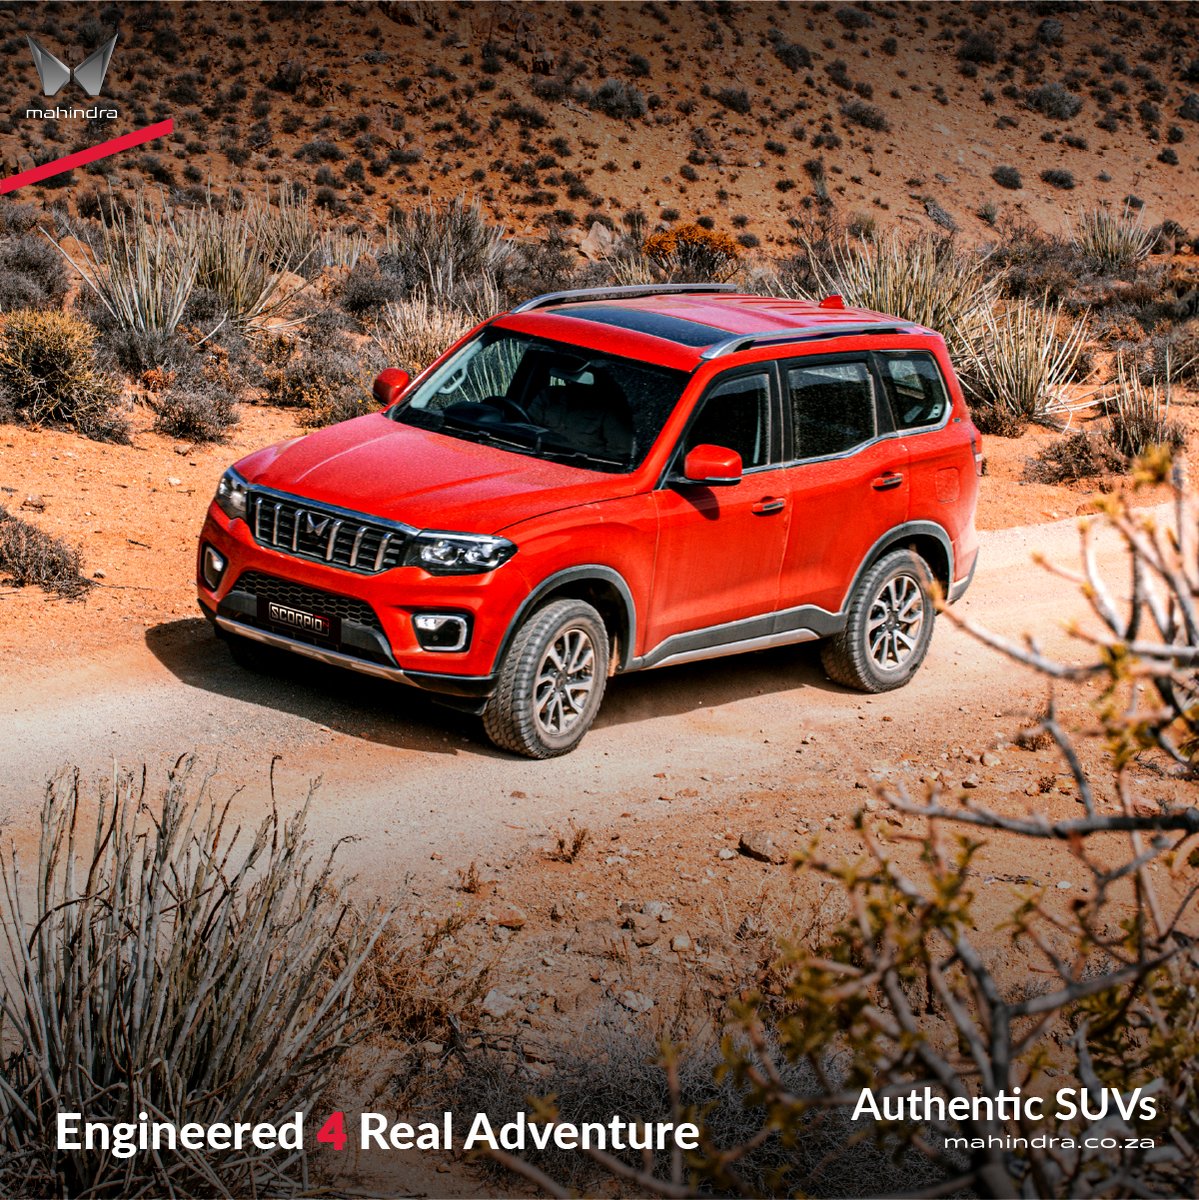 Feel the thrill of the unknown with the Scorpio-N's 4XPLR mode. Engineered for adventurers, it promises mastery over any terrain, daring you to chart new paths and create unbelievable stories. ​ Jump into any adventure with the Scorpio-N: brnw.ch/PikupDC ​ #MahindraSA